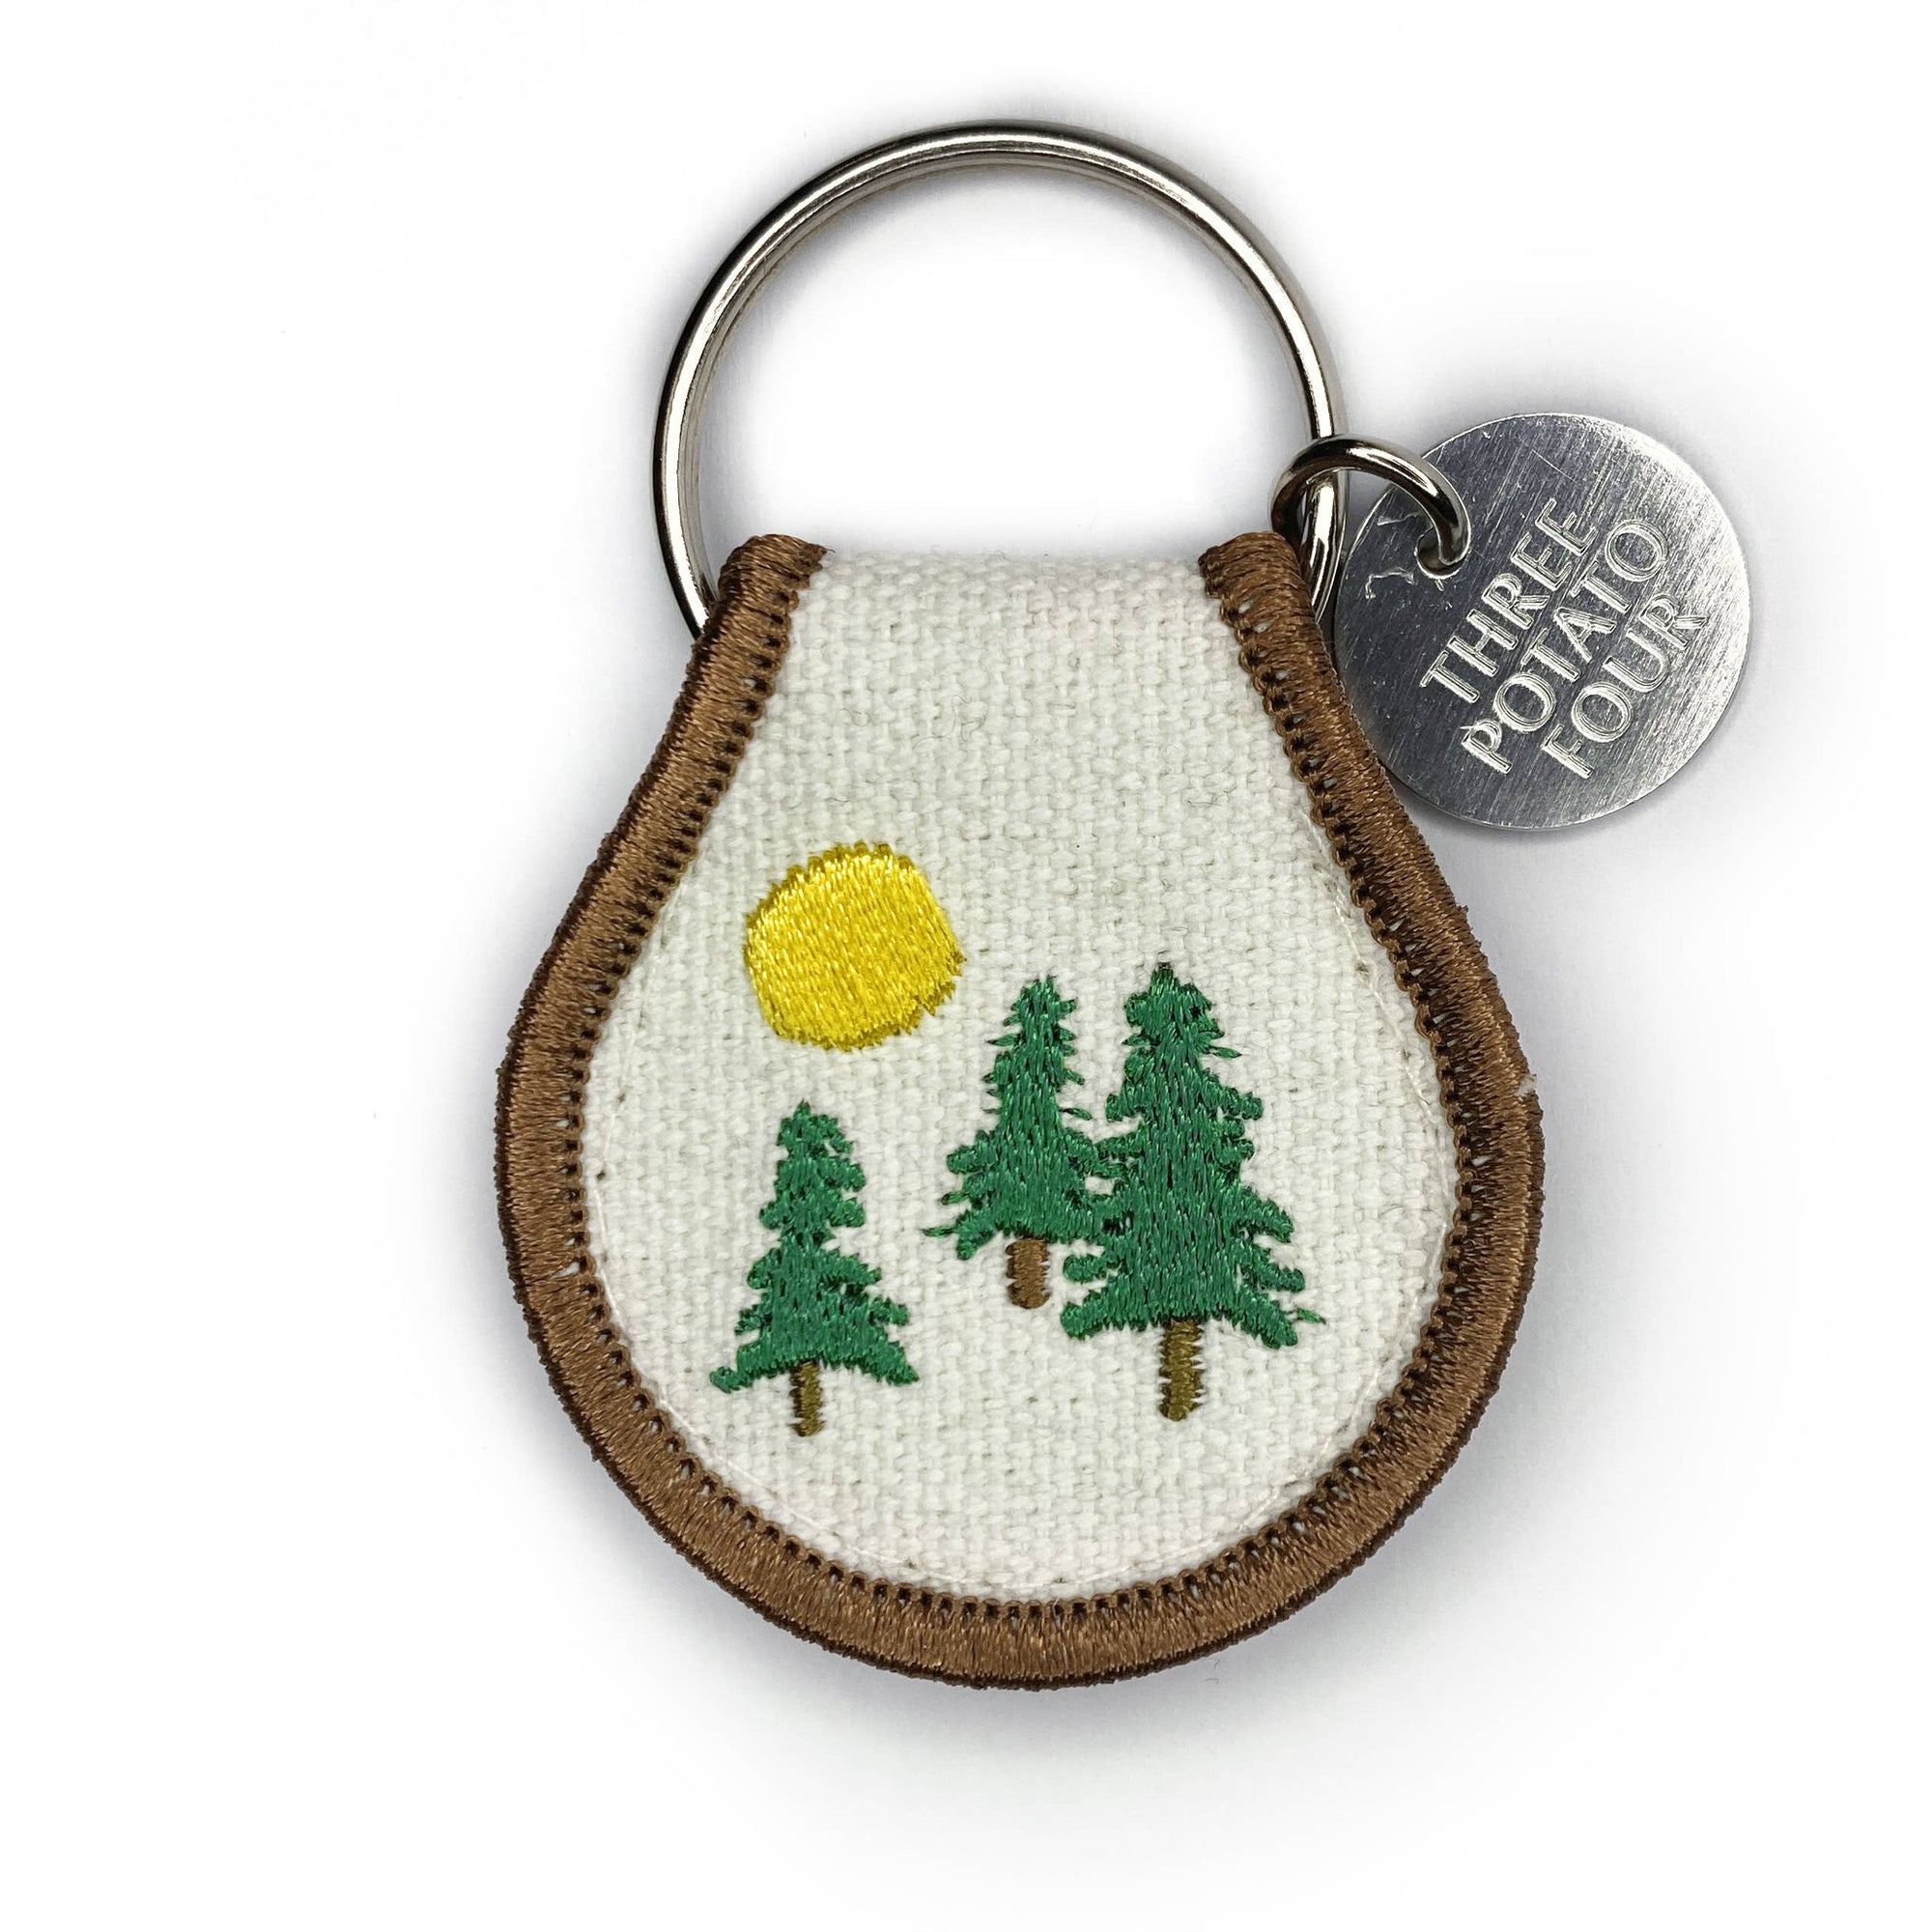 A Patch Keychain - Evergreen by Three Potato Four with a picture of trees and a sun.